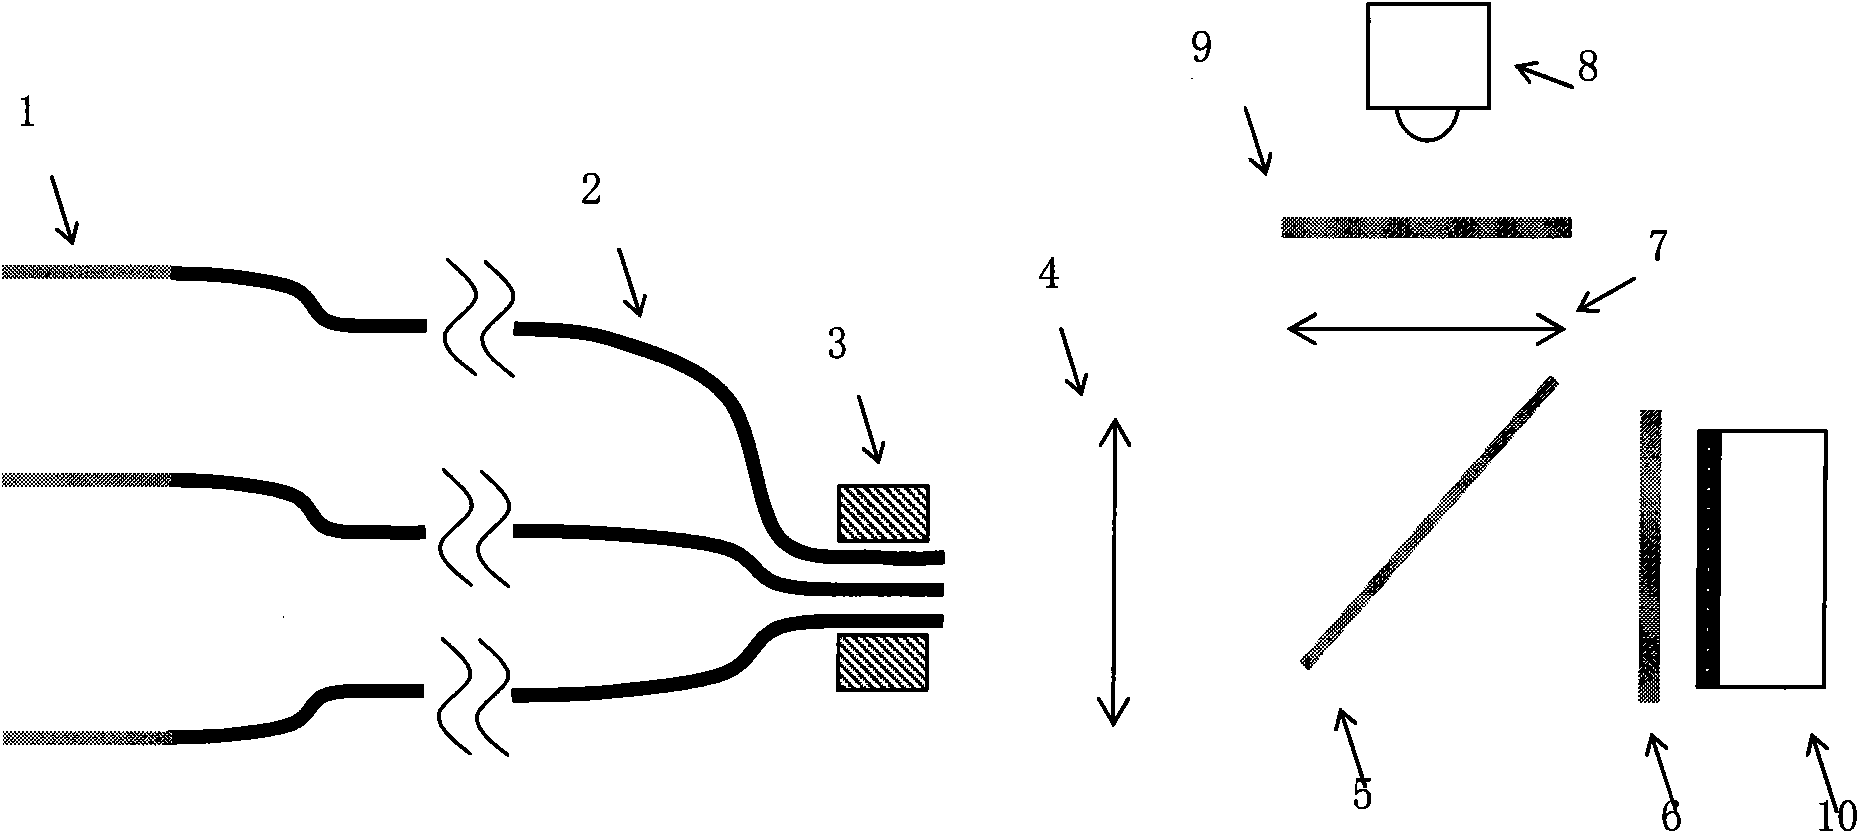 Minimally invasive multiple channel in vivo fluorescence signal real-time detection system and method